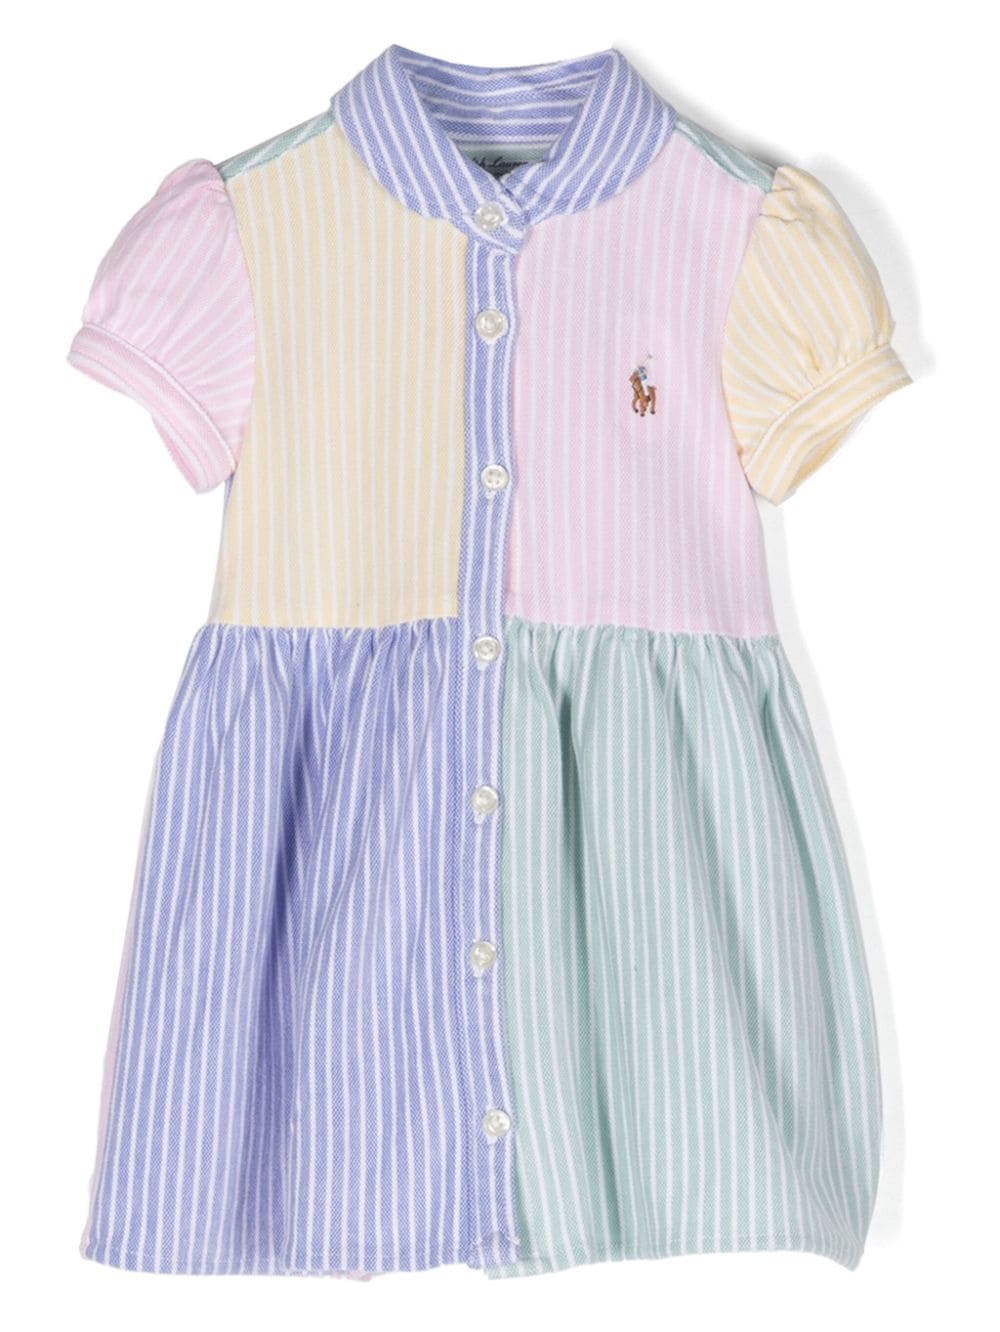 Multicolored dress for baby girls with logo